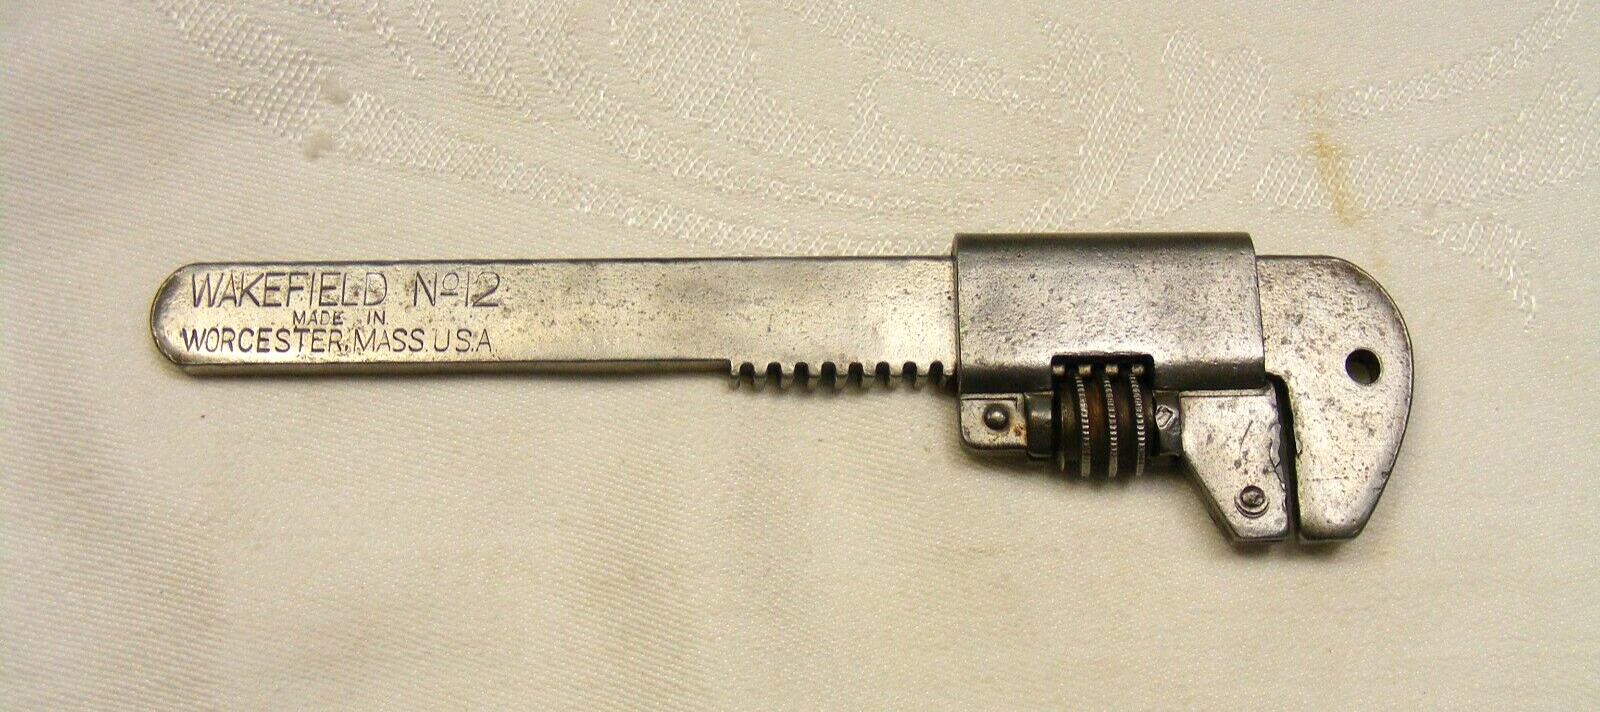 Vintage Wakefield No. 12 Bicycle Wrench 8-a